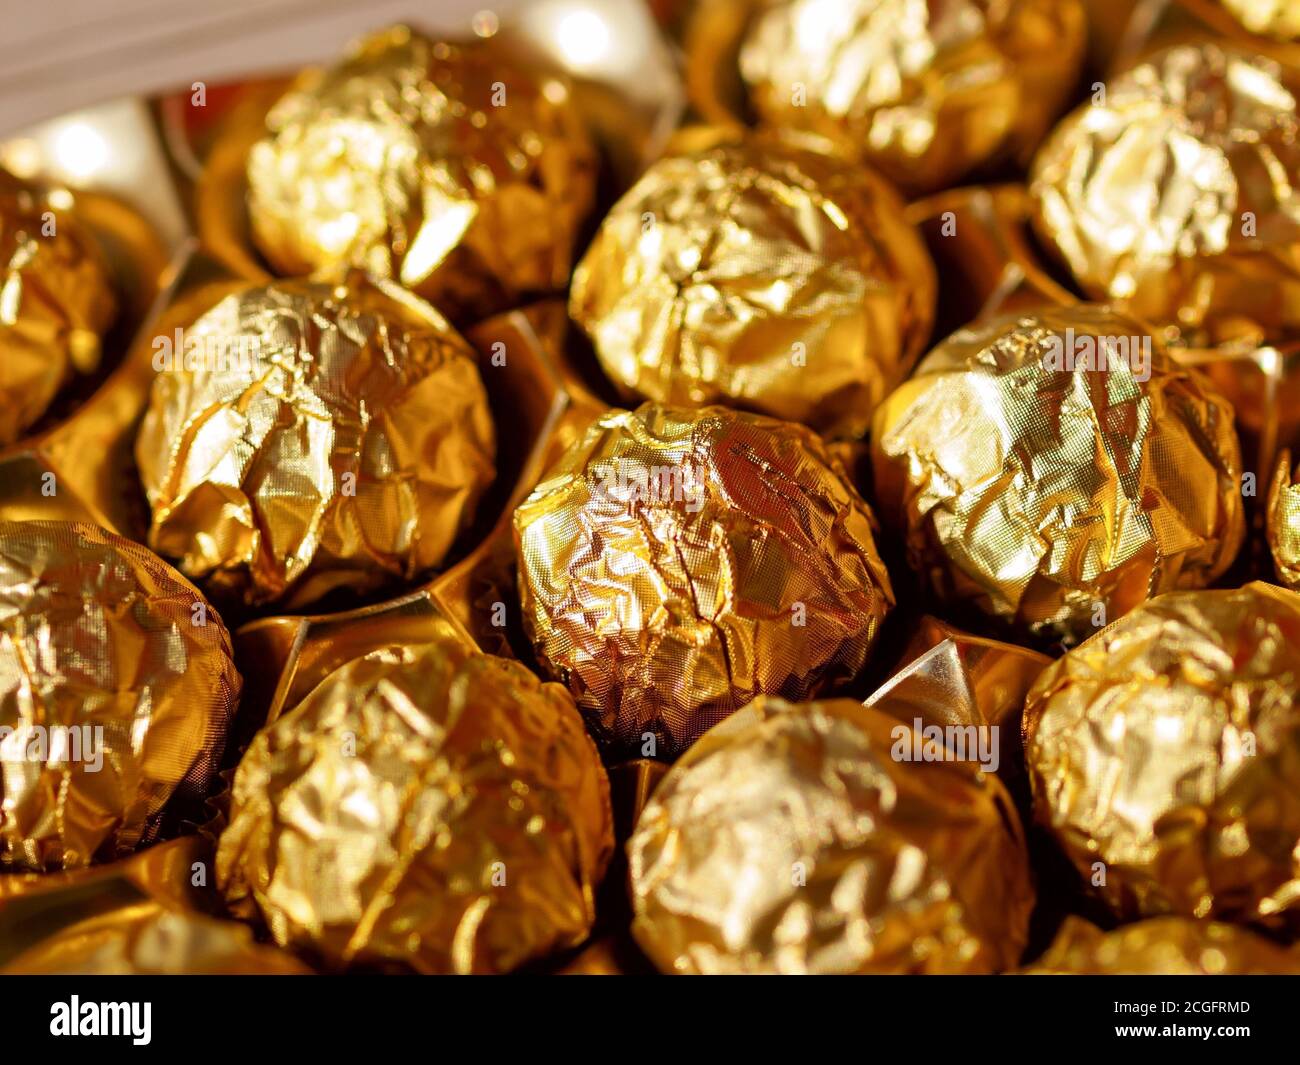 Chocolate candies in a gold wrapper, sweet chocolate candies Stock